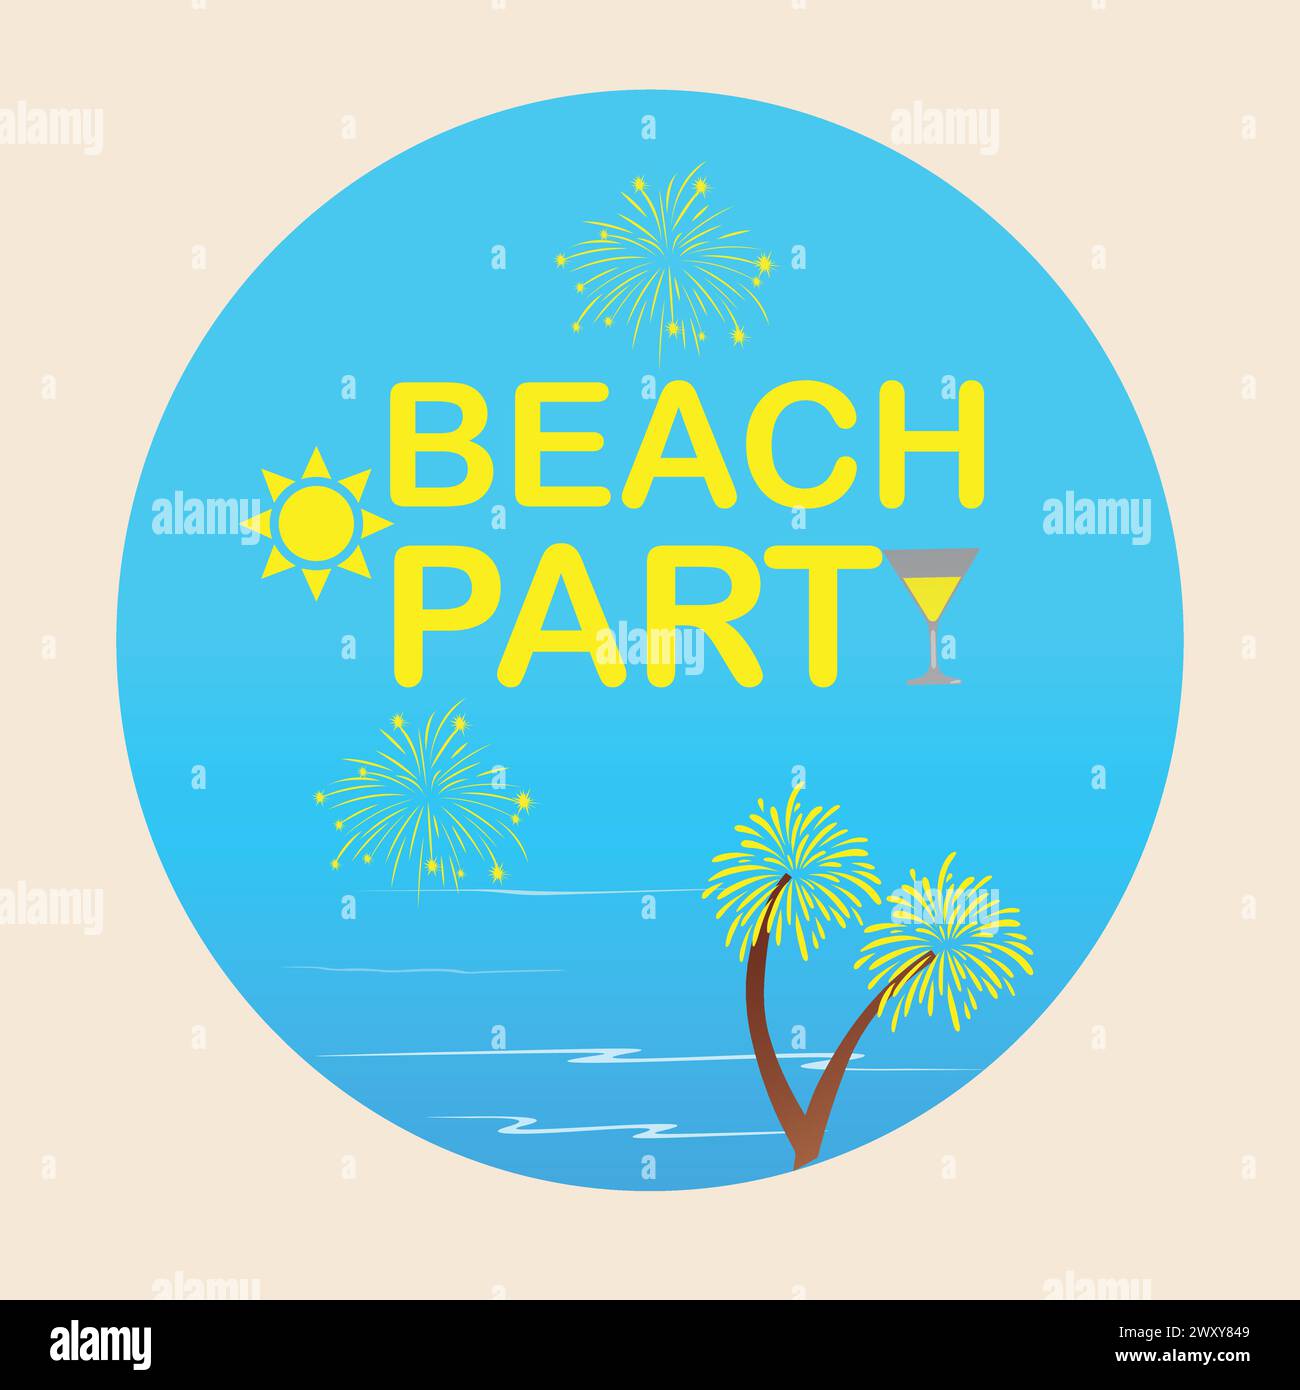 Beach party invitation poster with blue water, fireworks, sun, palm tree and cocktail glass Stock Vector